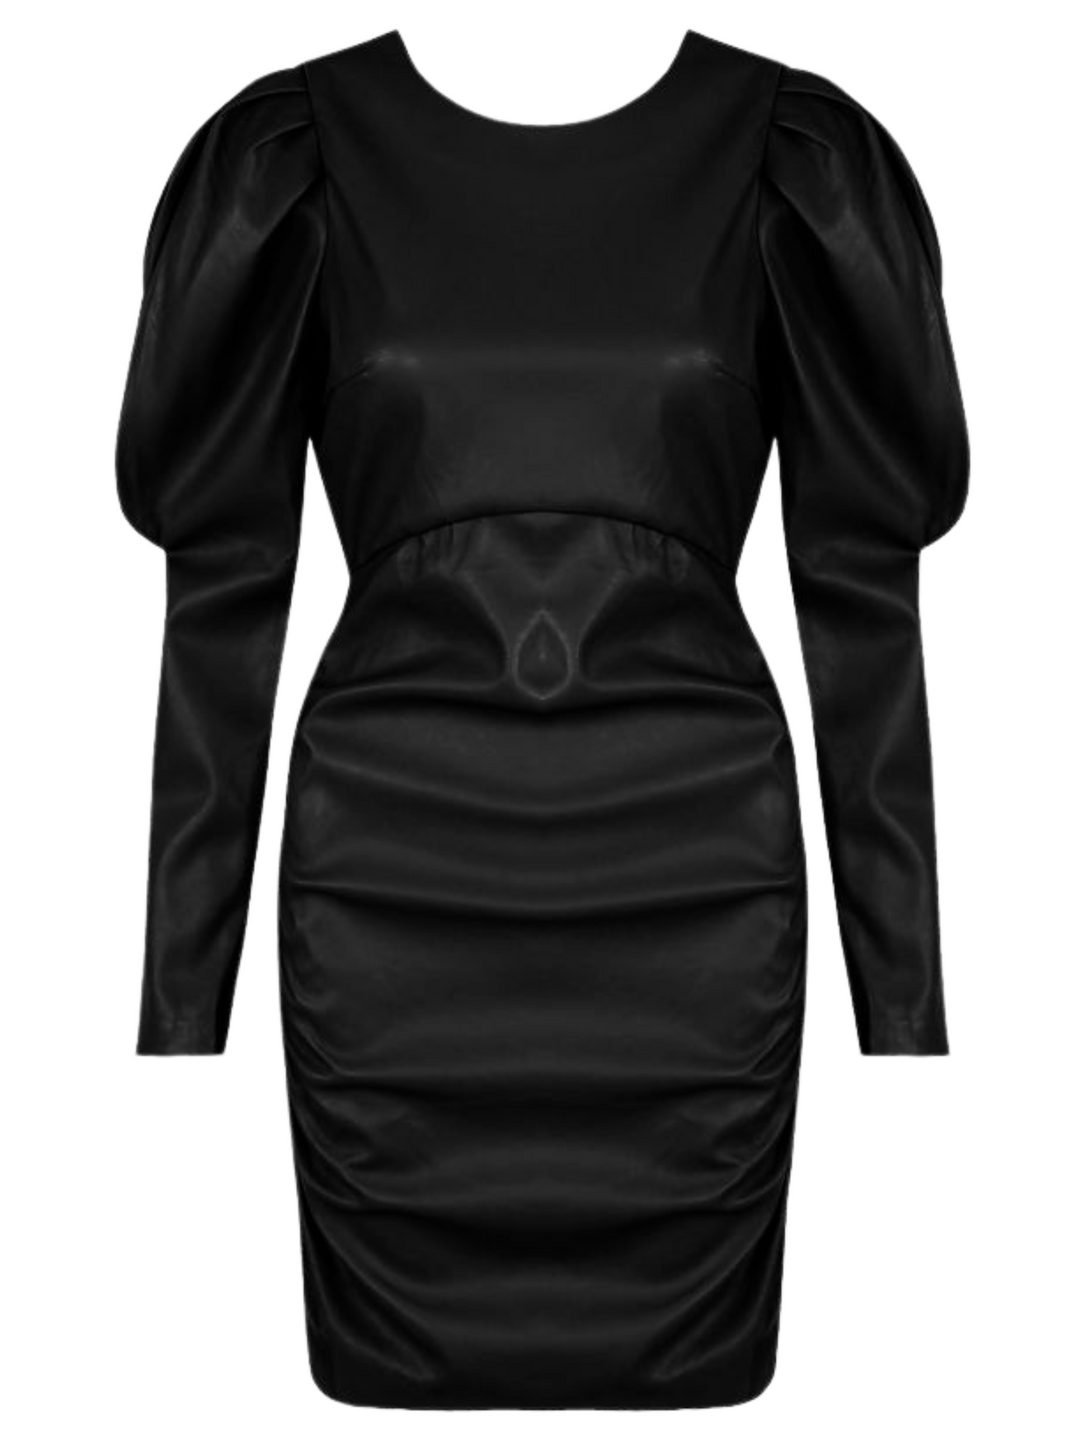 Ghost manequin wears a luxe faux leather mini dress, with statement pleated shoulders and long sleeves. The dress has a bodycon fit.